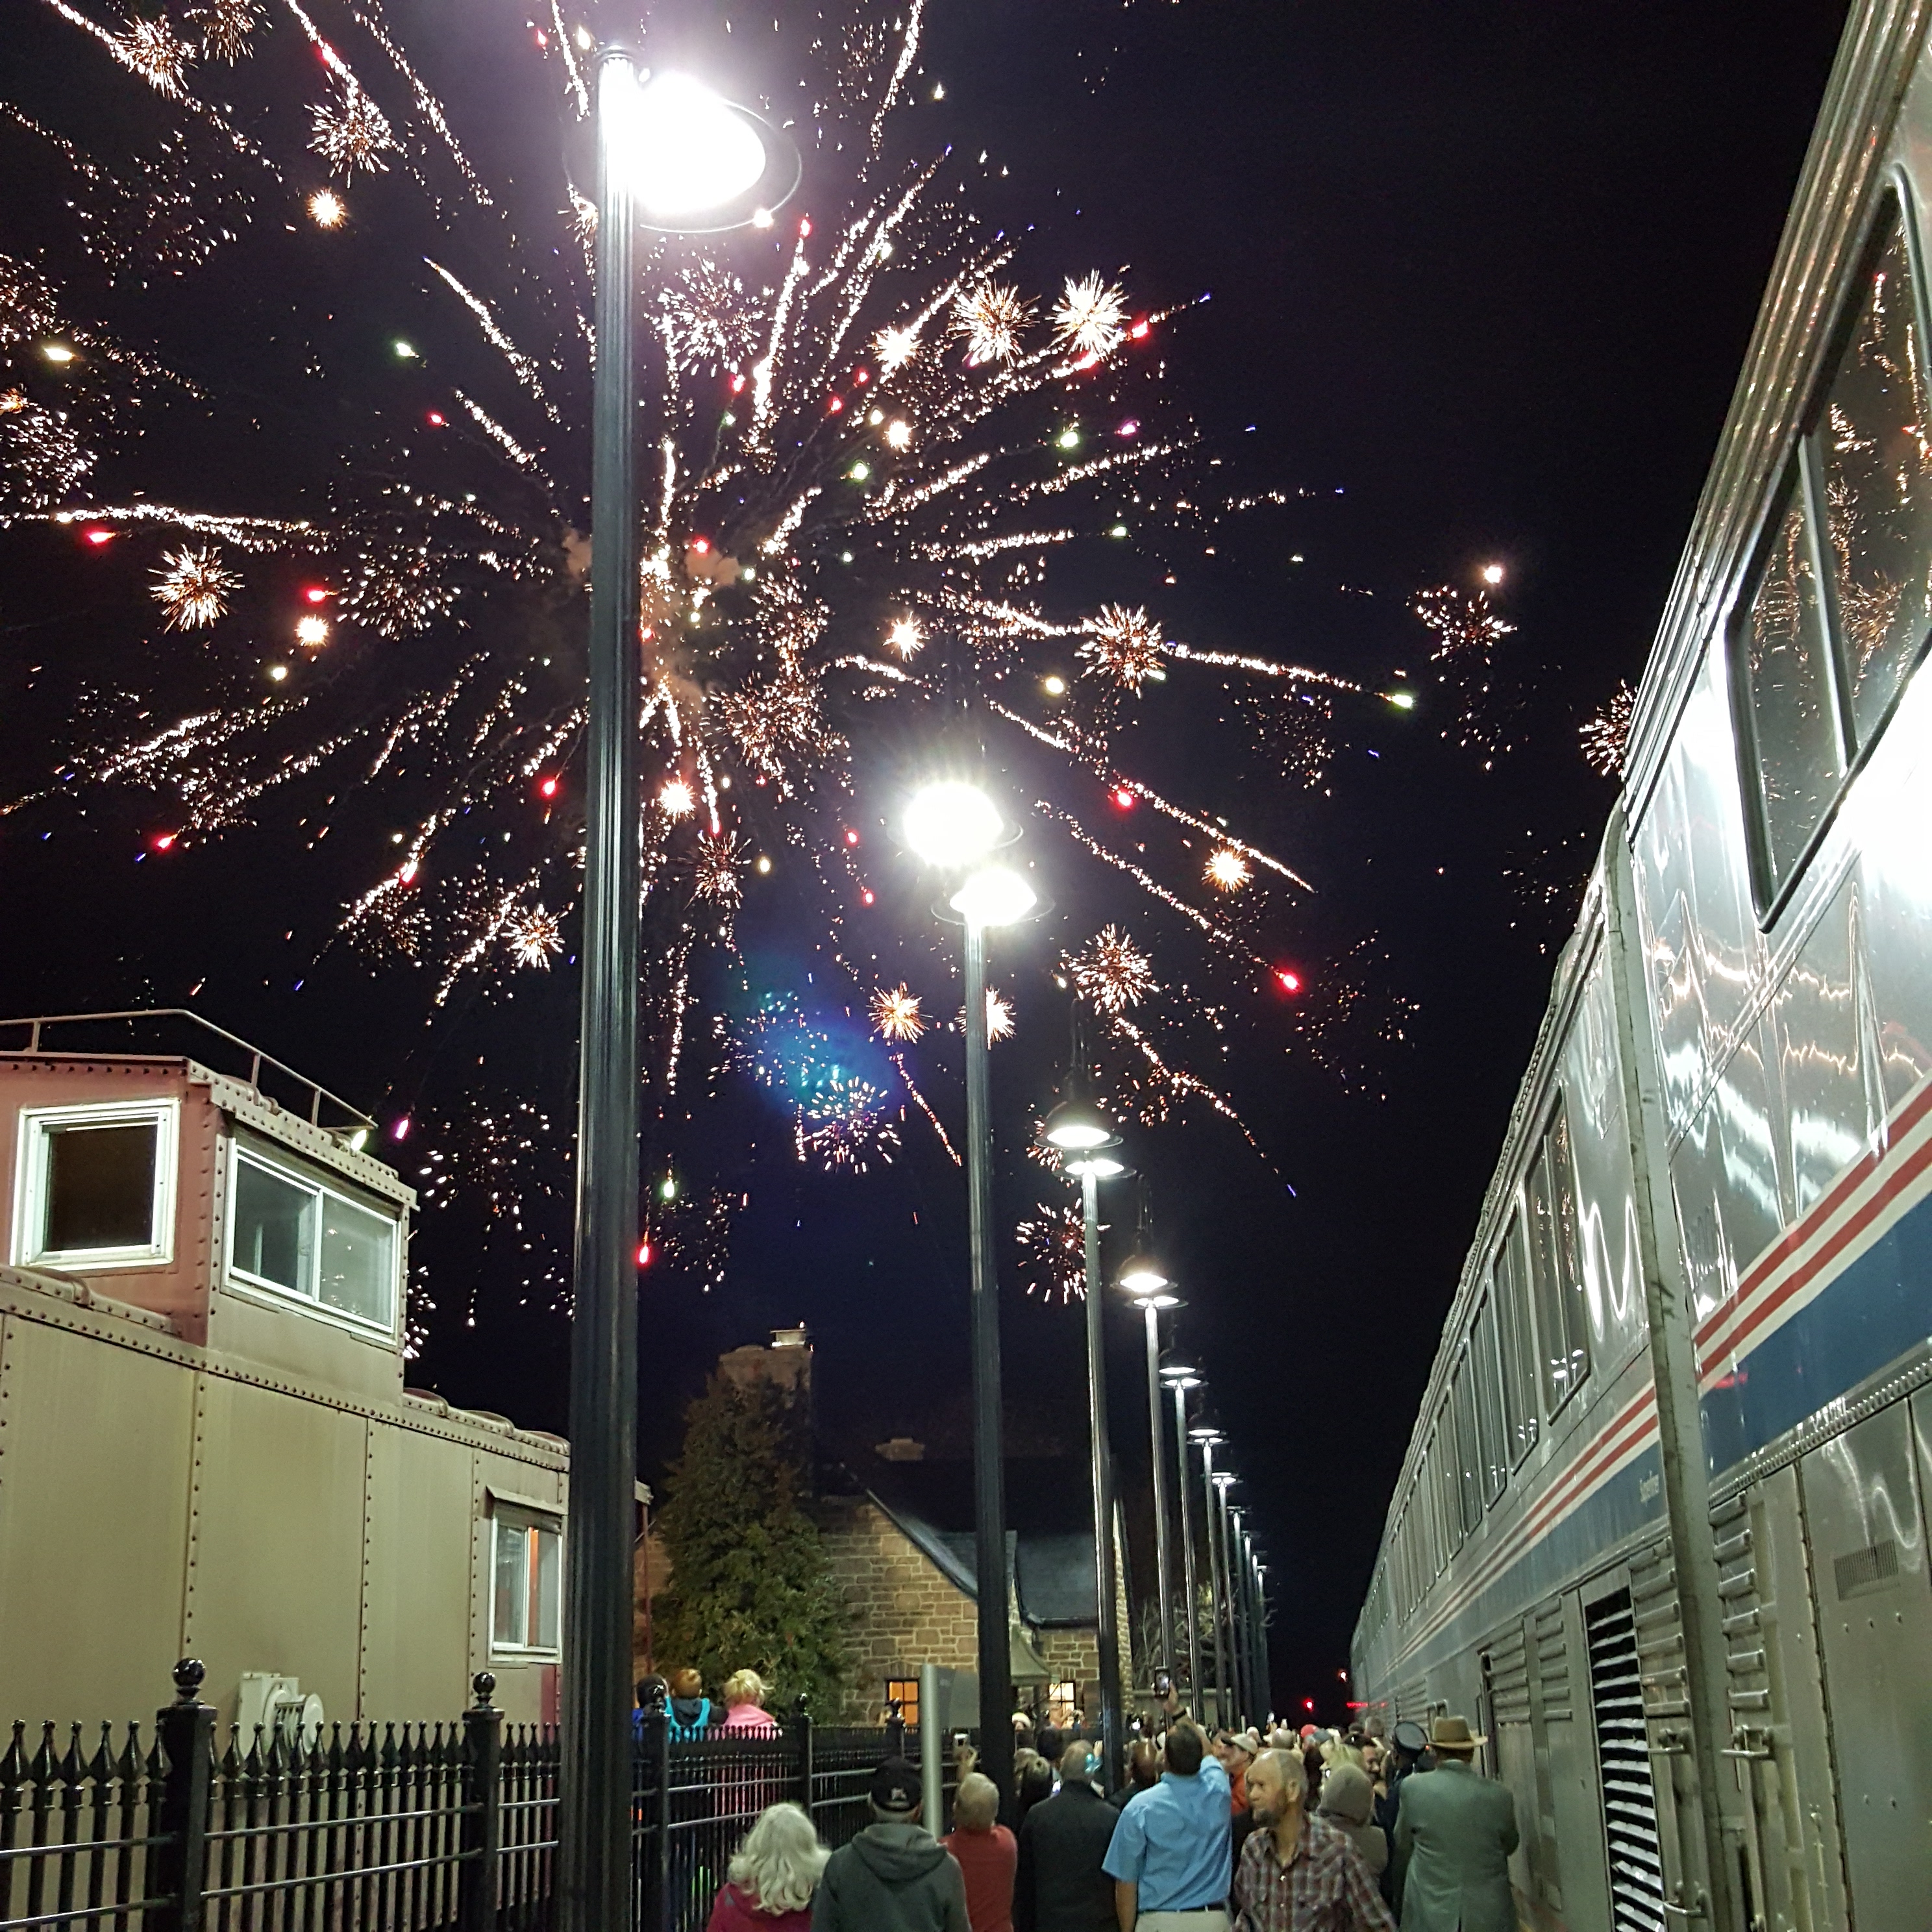 The Best 4th of July Fireworks Around the Country via Amtrak